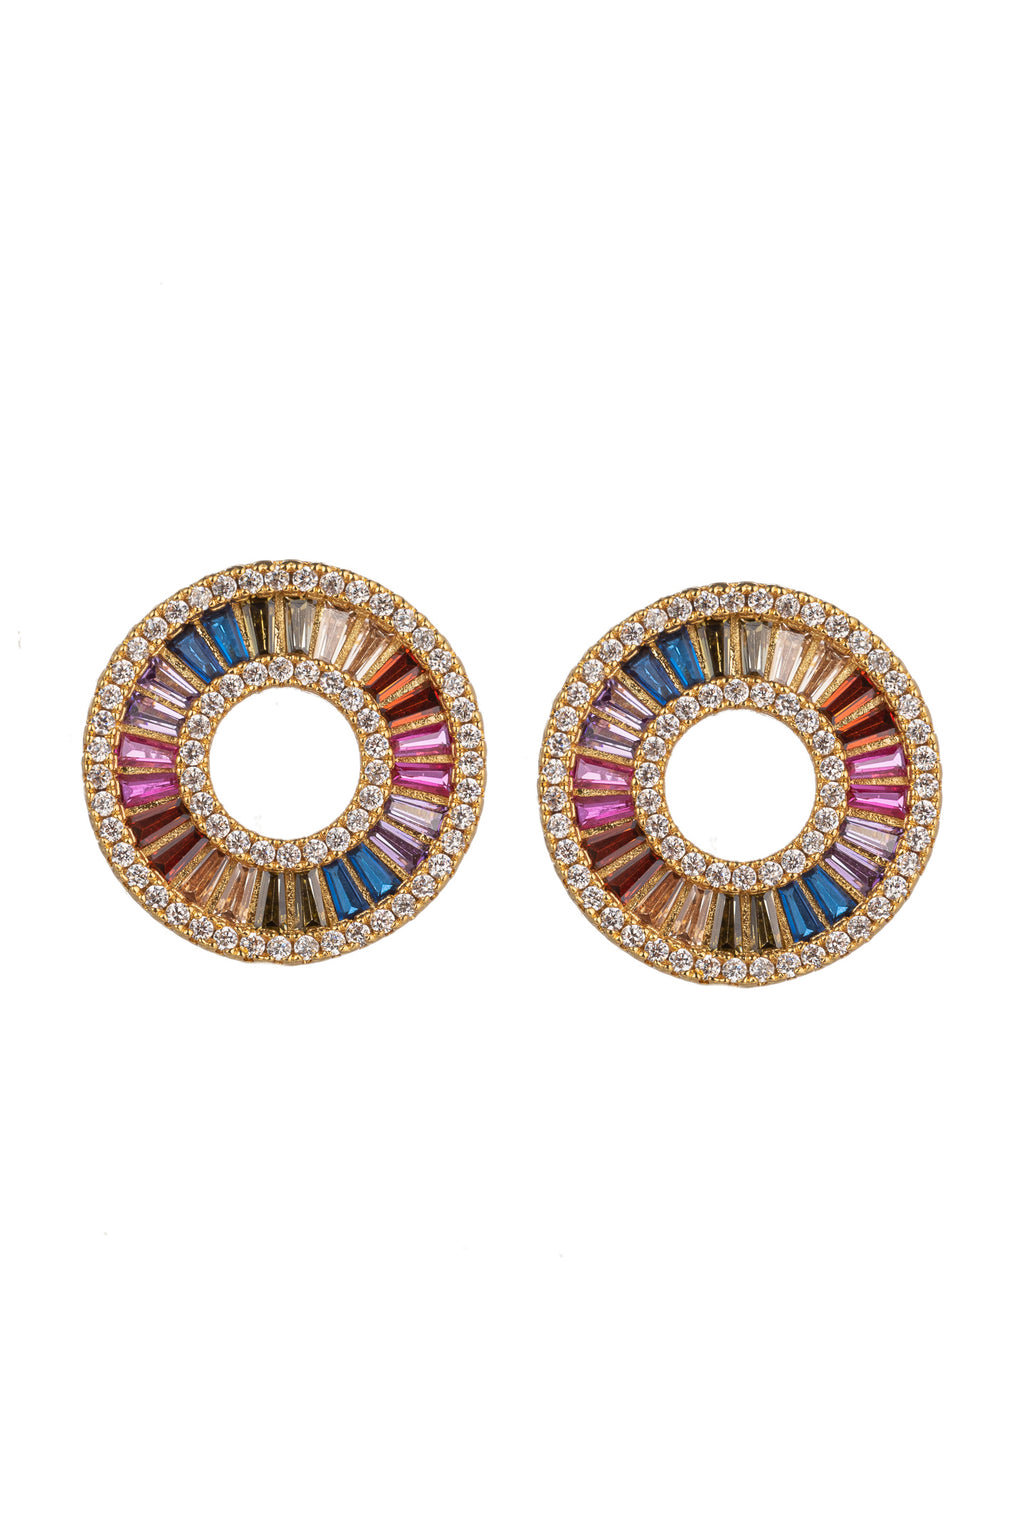 18k gold plated rainbow stud earrings studded with CZ crystals.